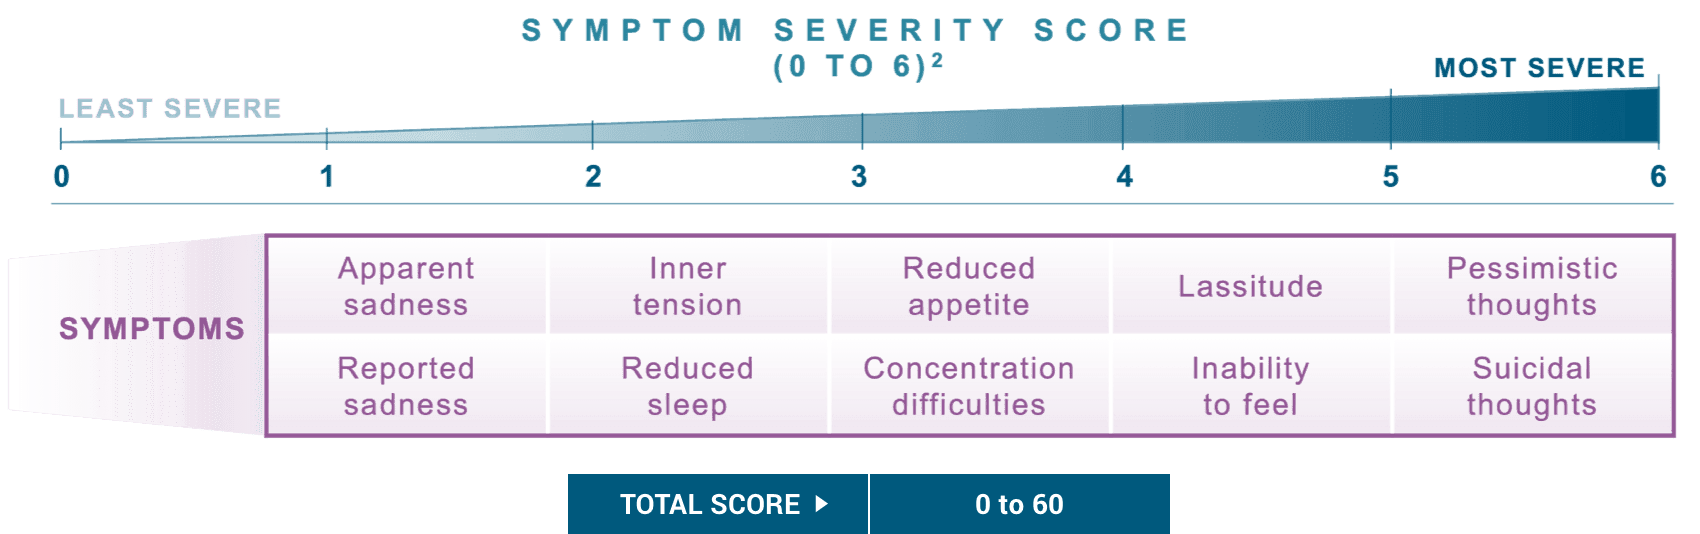 Symptom severity score runs from 0 for least severe to 6 for most severe.